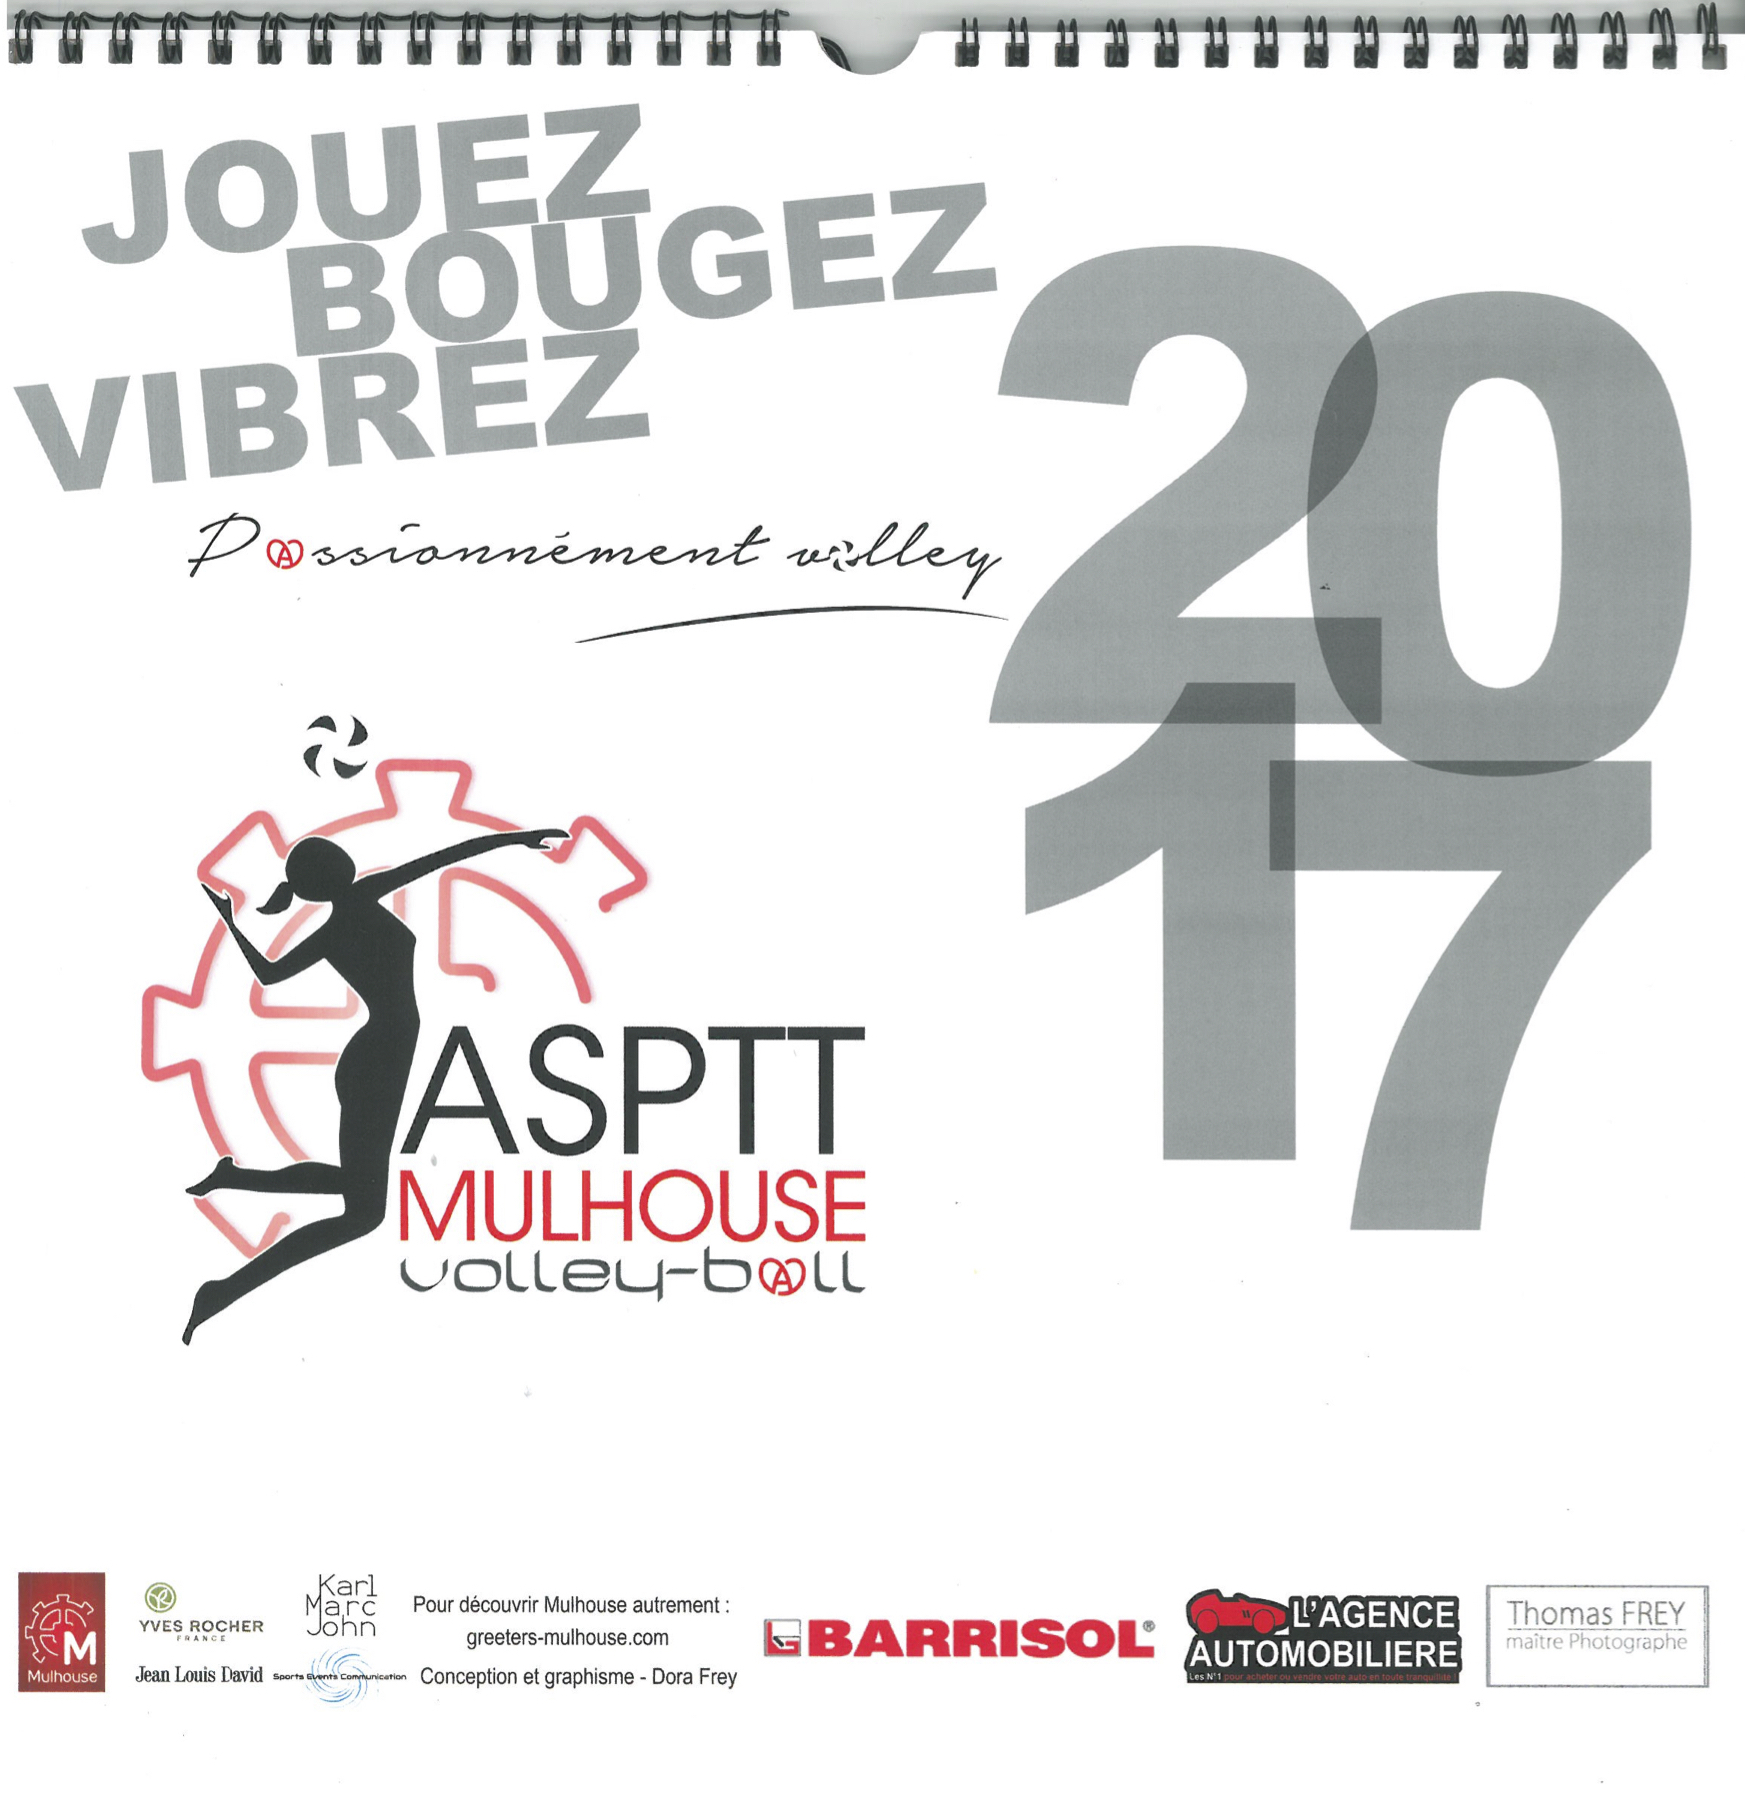 Barrisol supports the ASPTT-Mulhouse